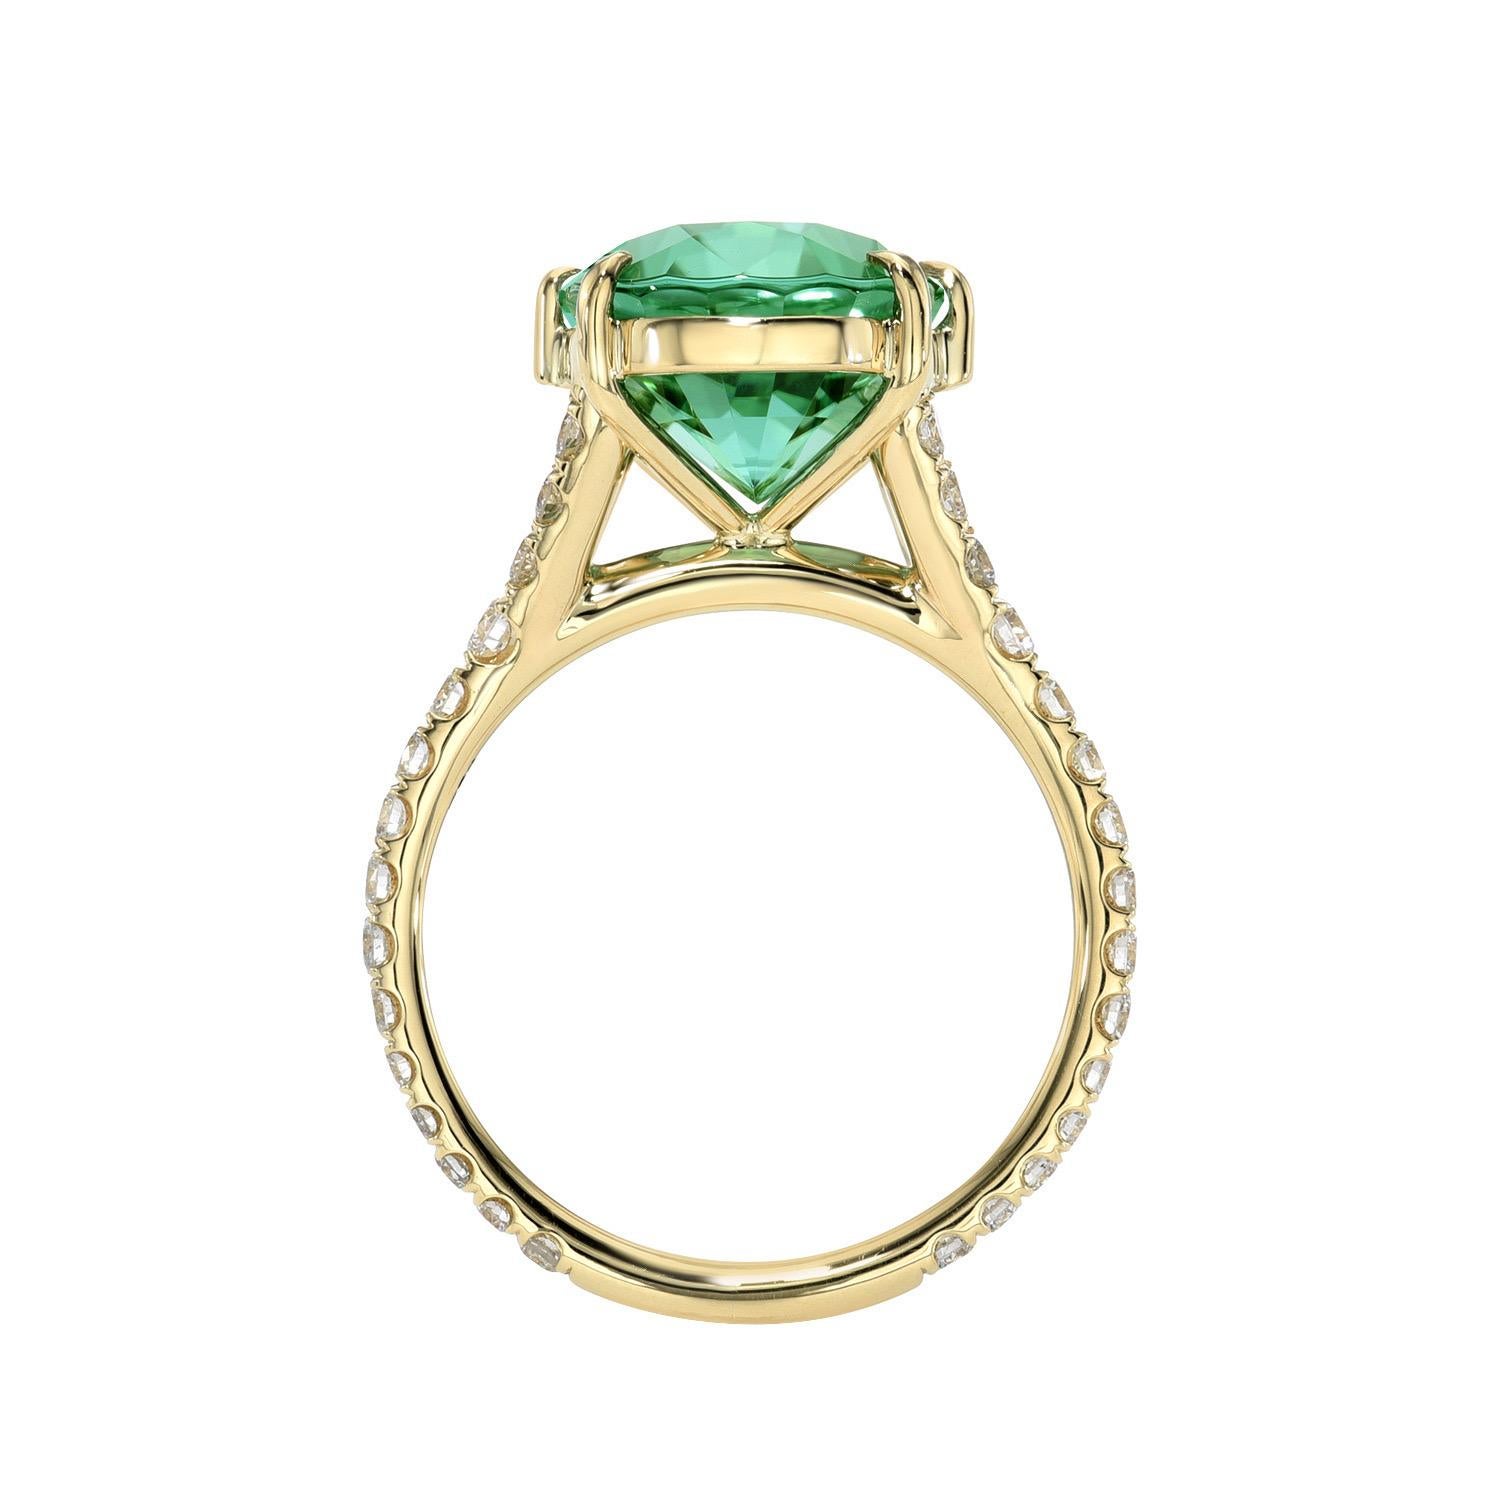 18K yellow gold ring set with a vibrant 6.33 carat Mint Green Tourmaline oval, decorated with a total of 0.61 carat, round brilliant collection diamonds.
Ring size 6. Resizing is complementary upon request.
Crafted by extremely skilled hands in the